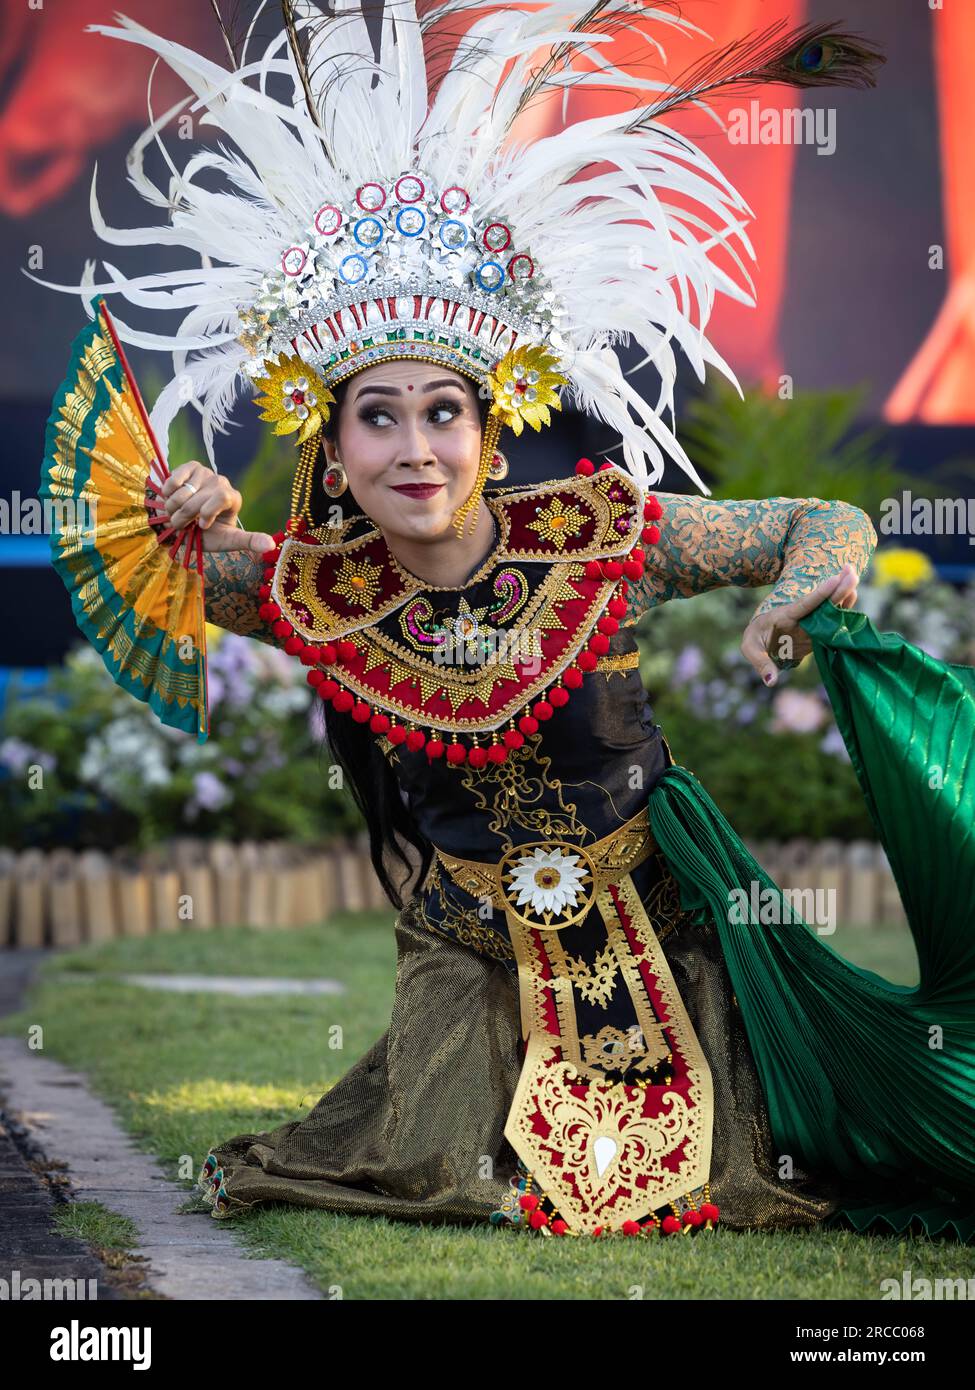 Denpasar, Indonesia. 10th July, 2023. A traditional Balinese dancer performs during the opening ceremony for the Pacific Amphibious Leaders Symposium, July 10, 2023 in Denpasar, Bali, Indonesia. The symposium involves military leaders from 24 Indo-Pacific nations. Credit: Cpl. Arianna Lindheimer/U.S. Marine Corps/Alamy Live News Stock Photo